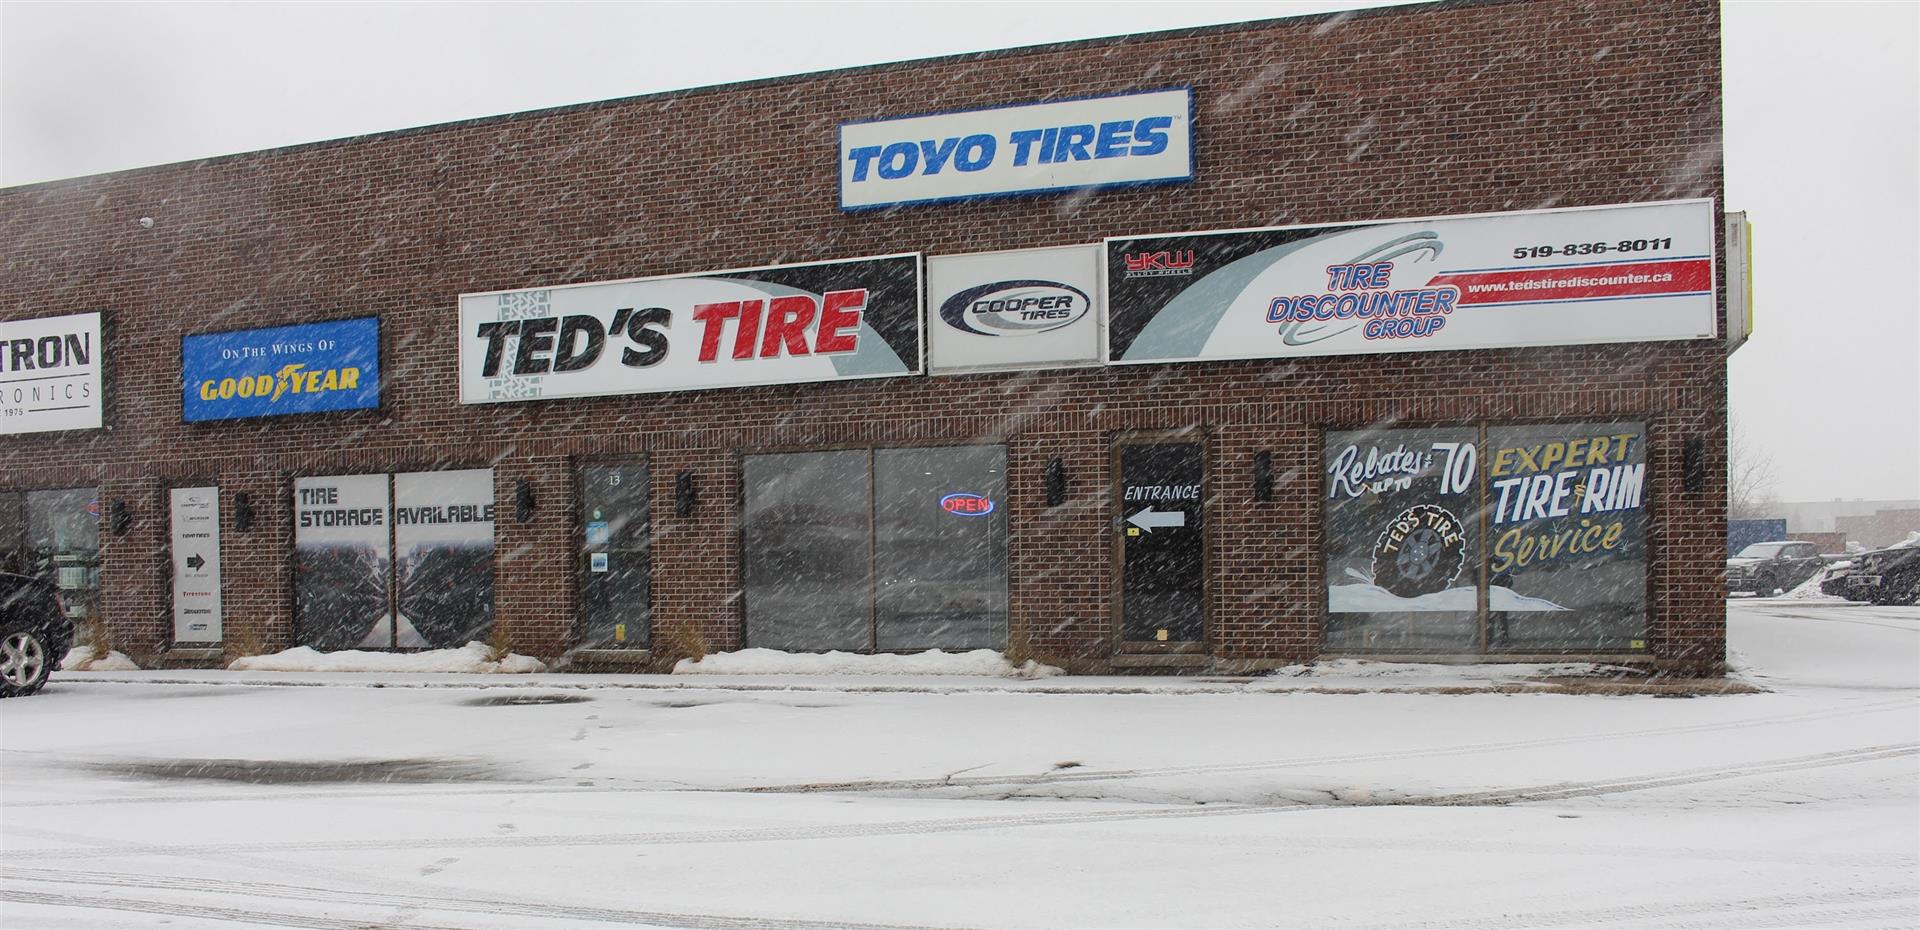 Ted's Tire Discounter storefront